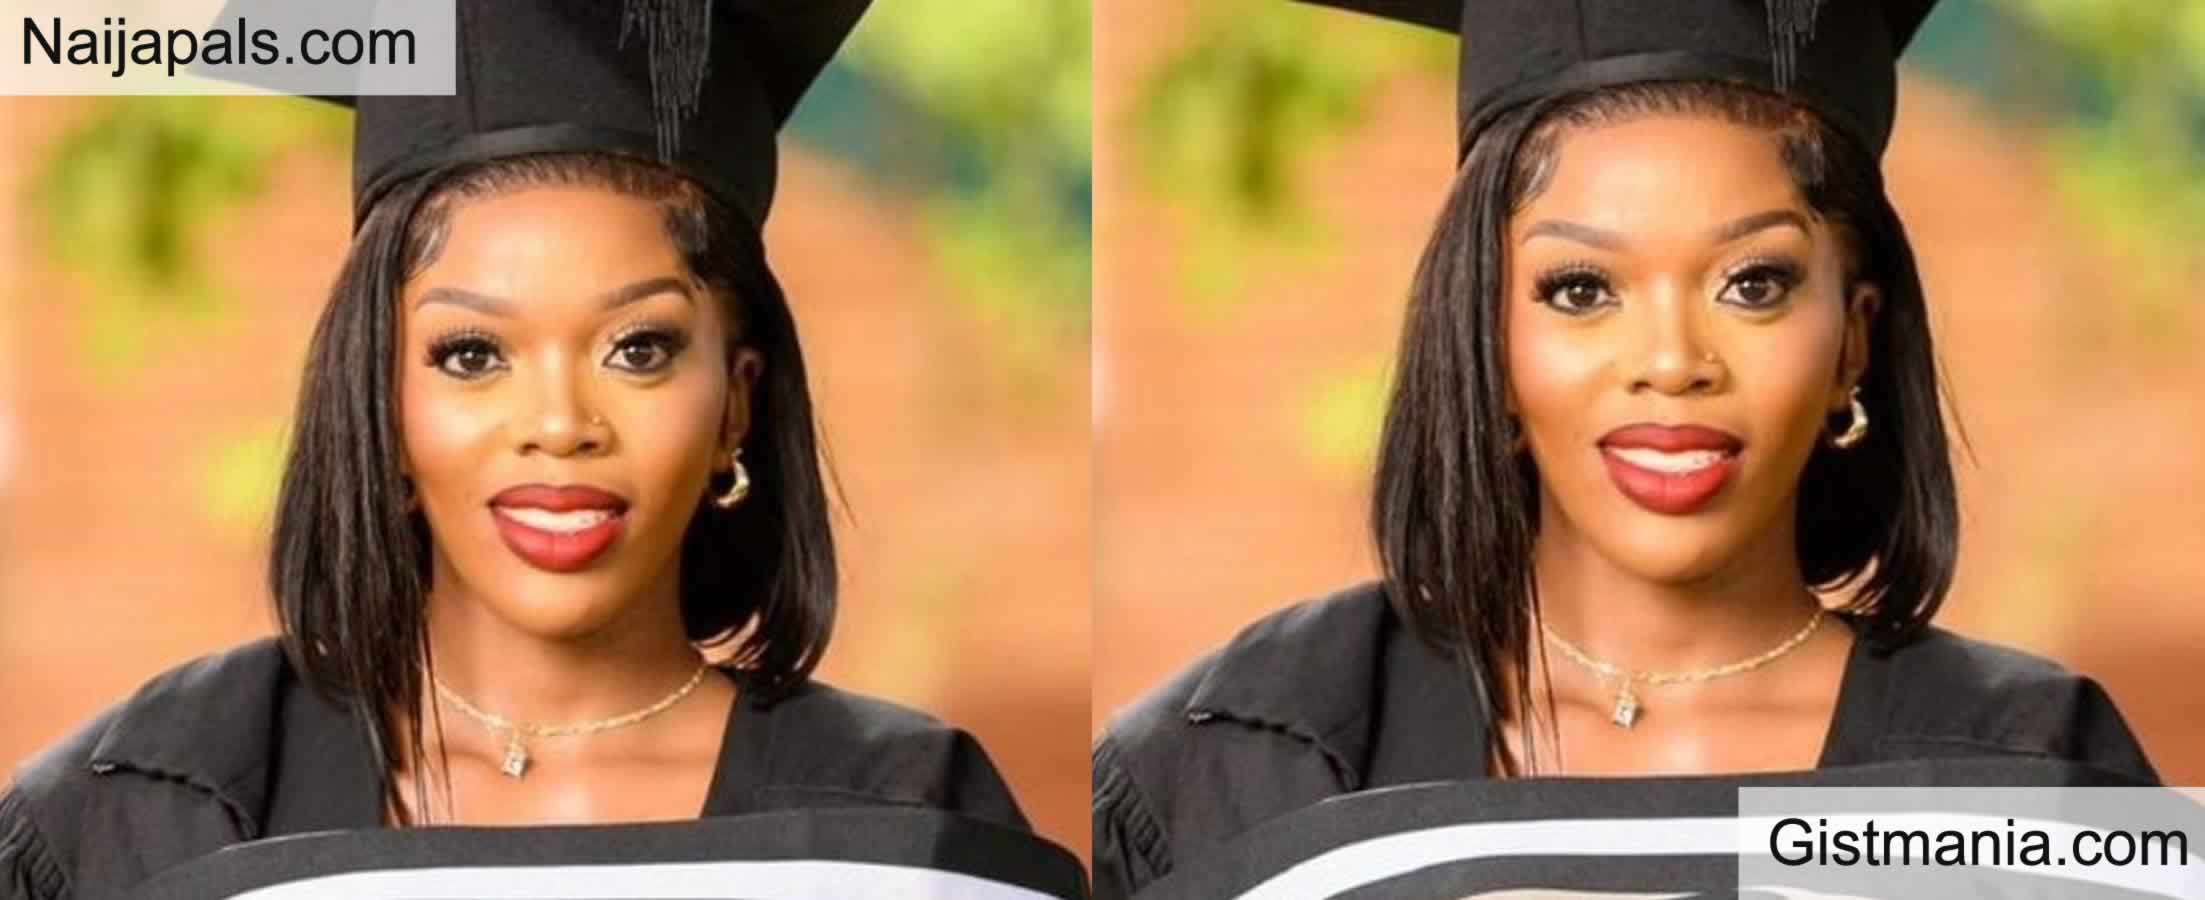 26Yr Old South African Lady Allegedly Beaten To Death By Her Boyfriend A Week After Graduation